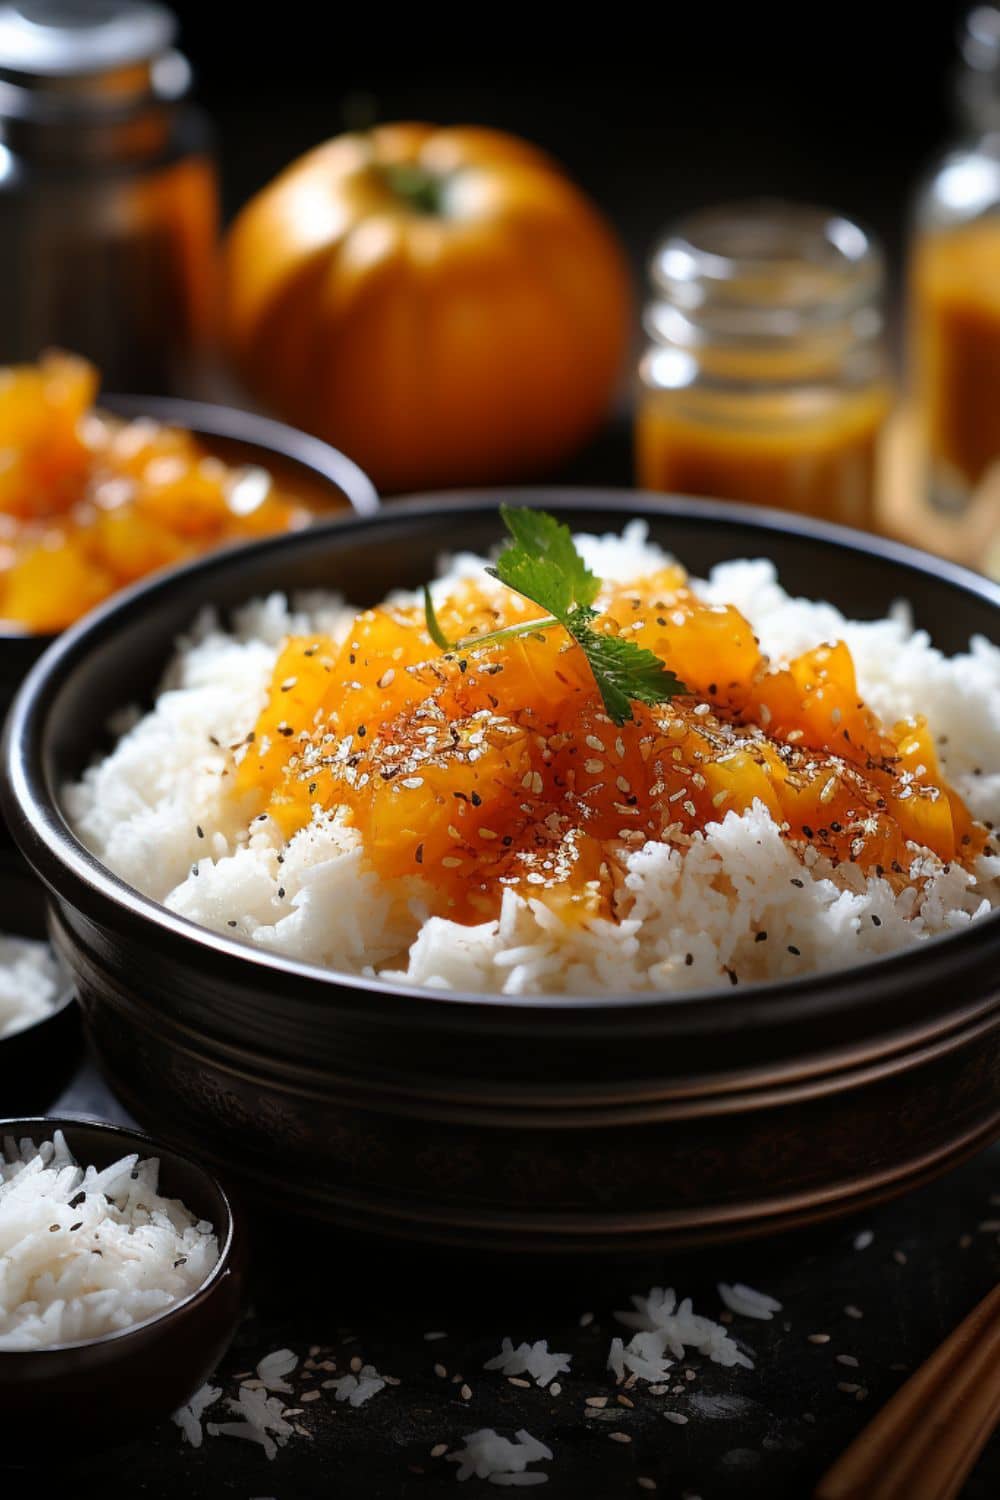 White rice and orange marmalade for orange foods on Halloween tables